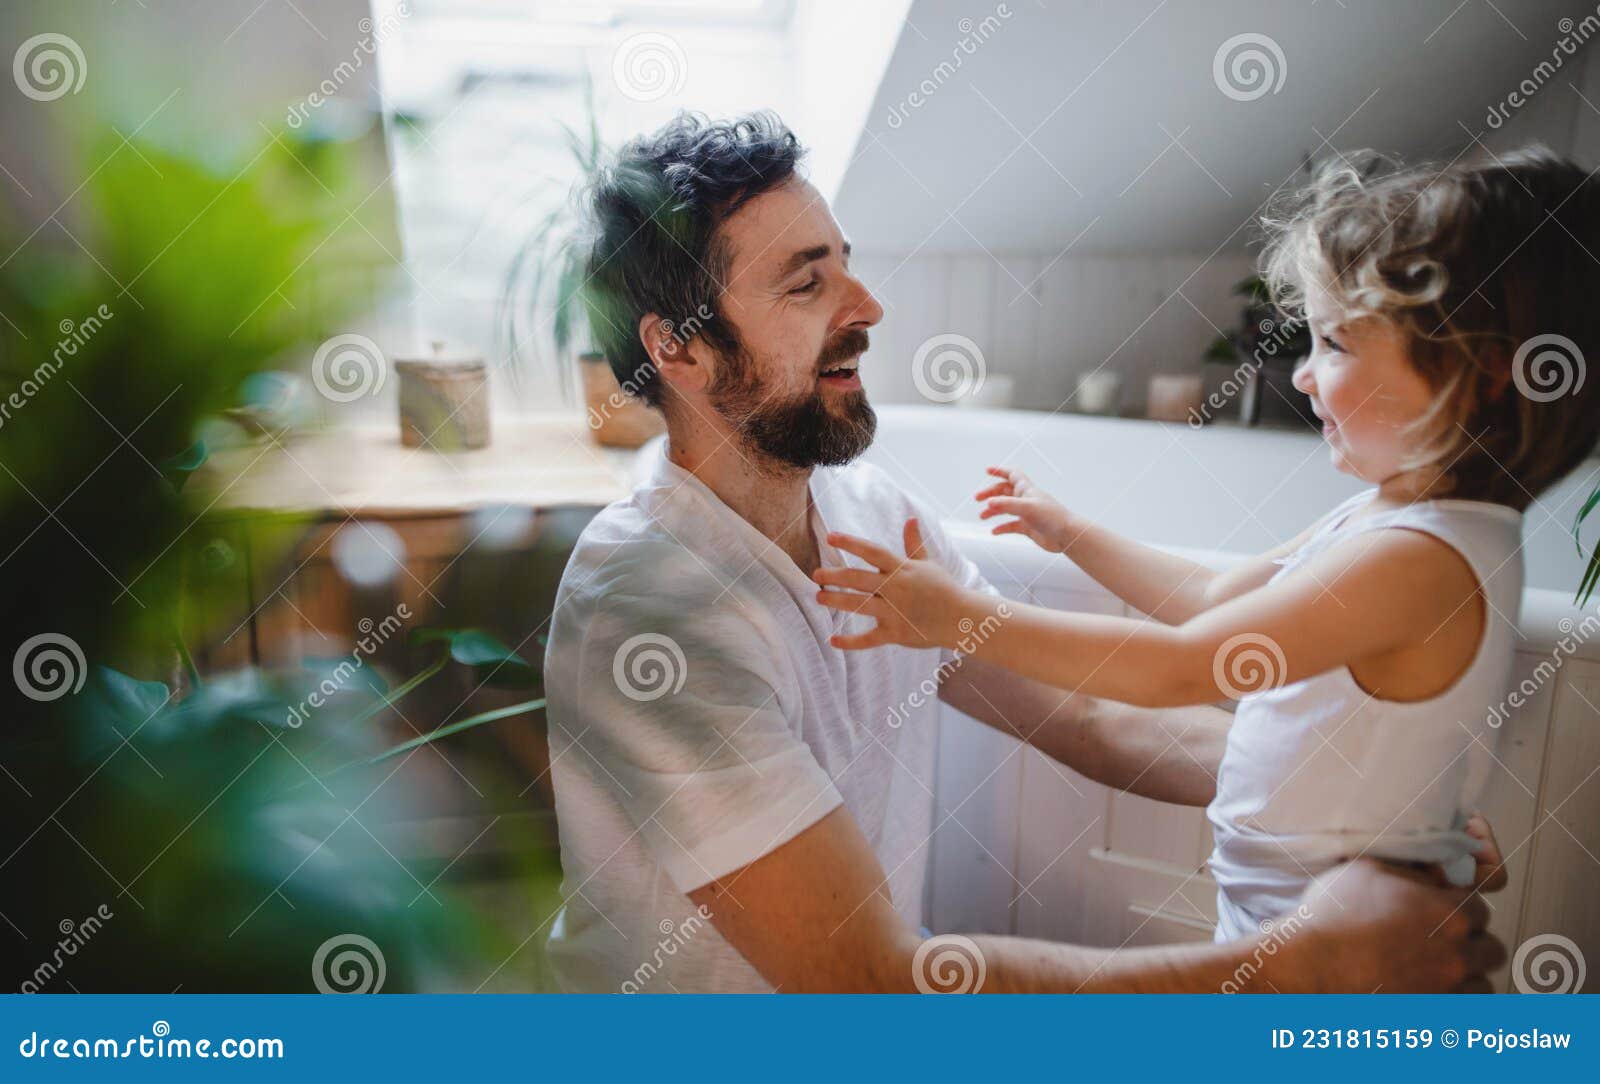 Mature Father With Small Daughter Indoors At Home Getting Ready For A Bath Stock Image Image